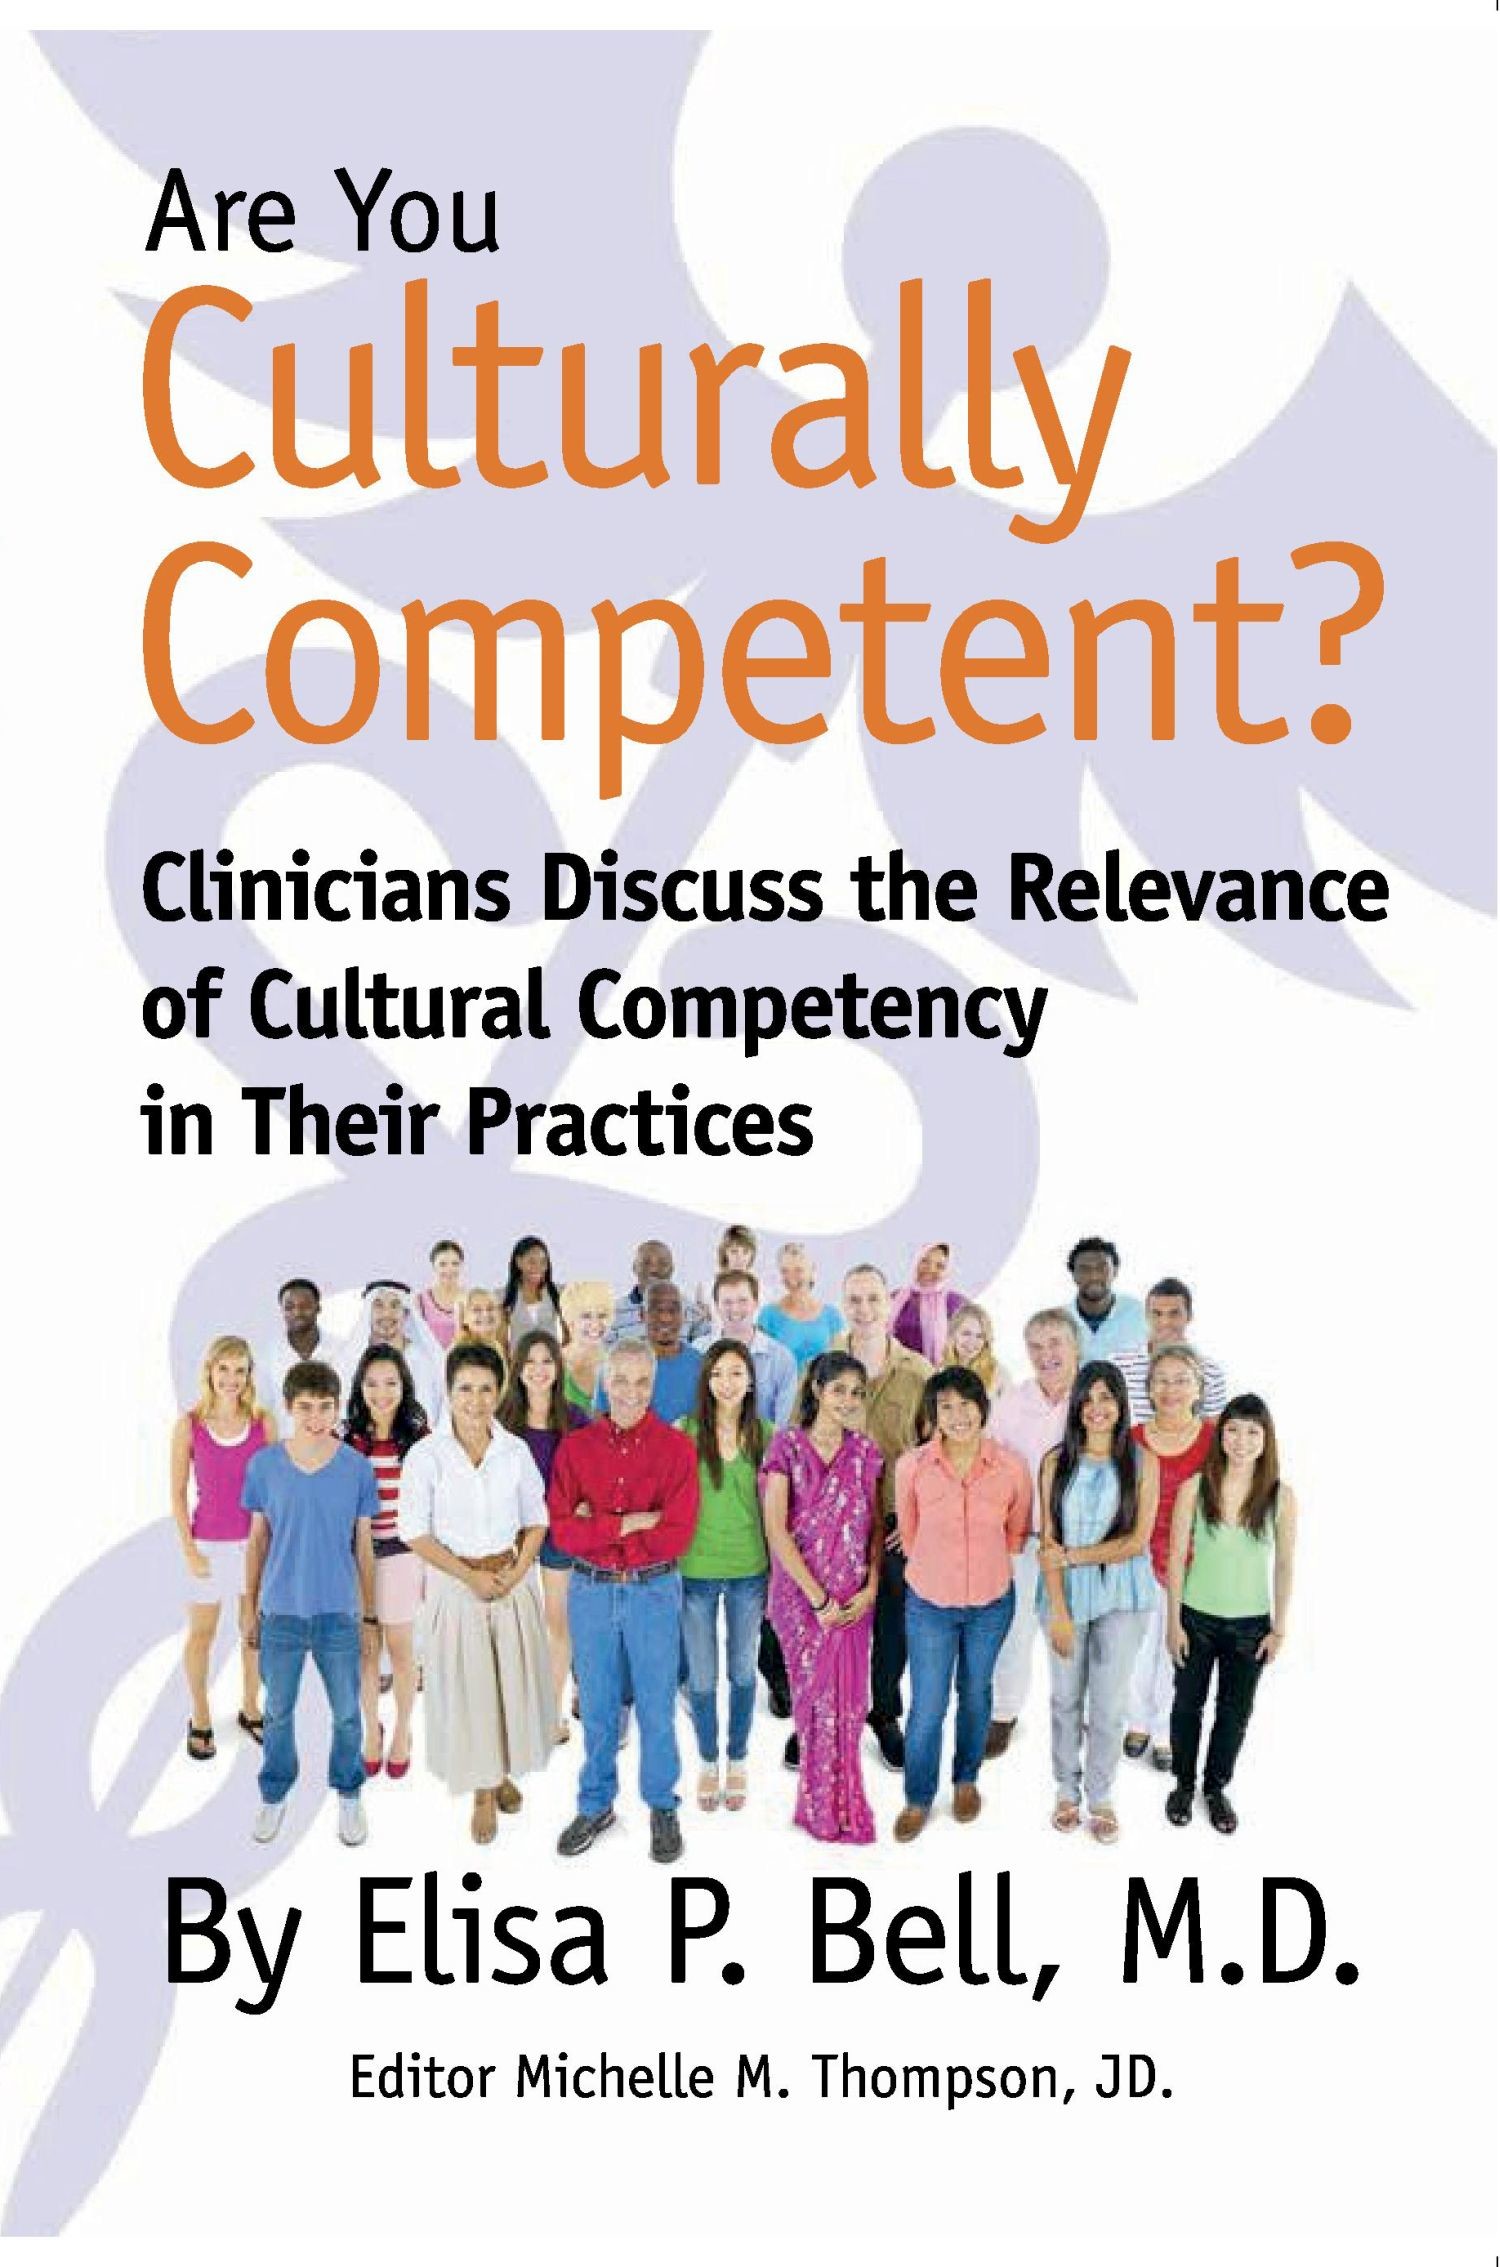 Are You Culturally Competent?